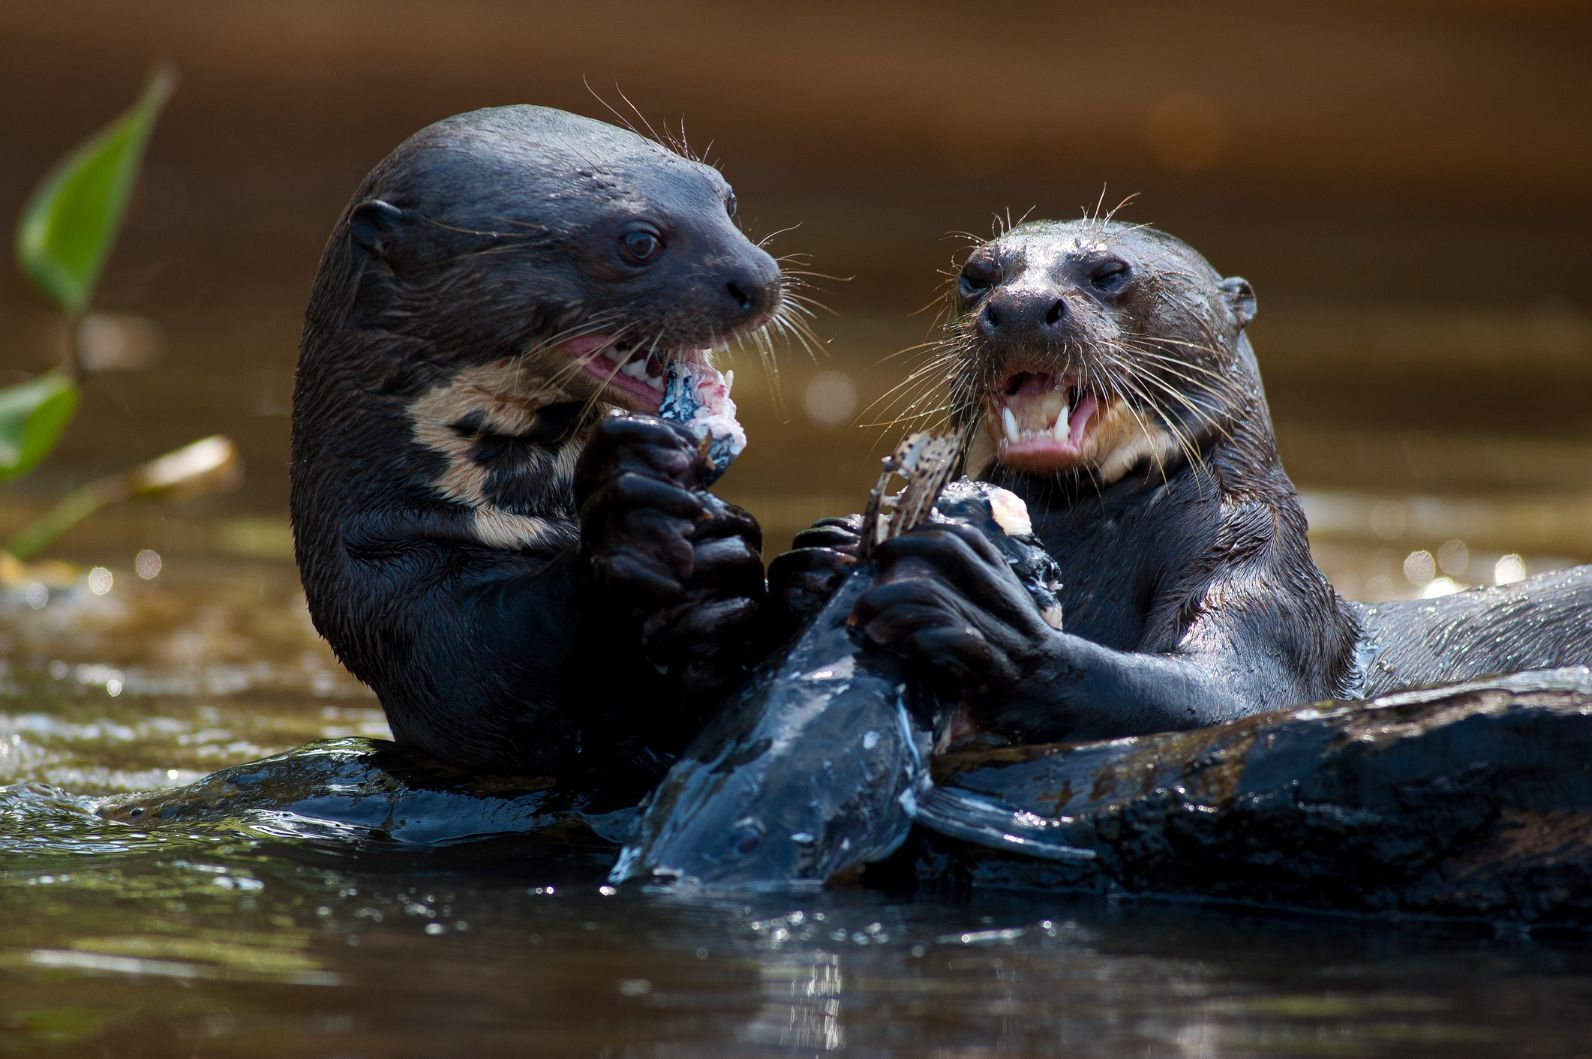 As well as being adorable, giant river otters allow plant life to thrive. Photo: Getty